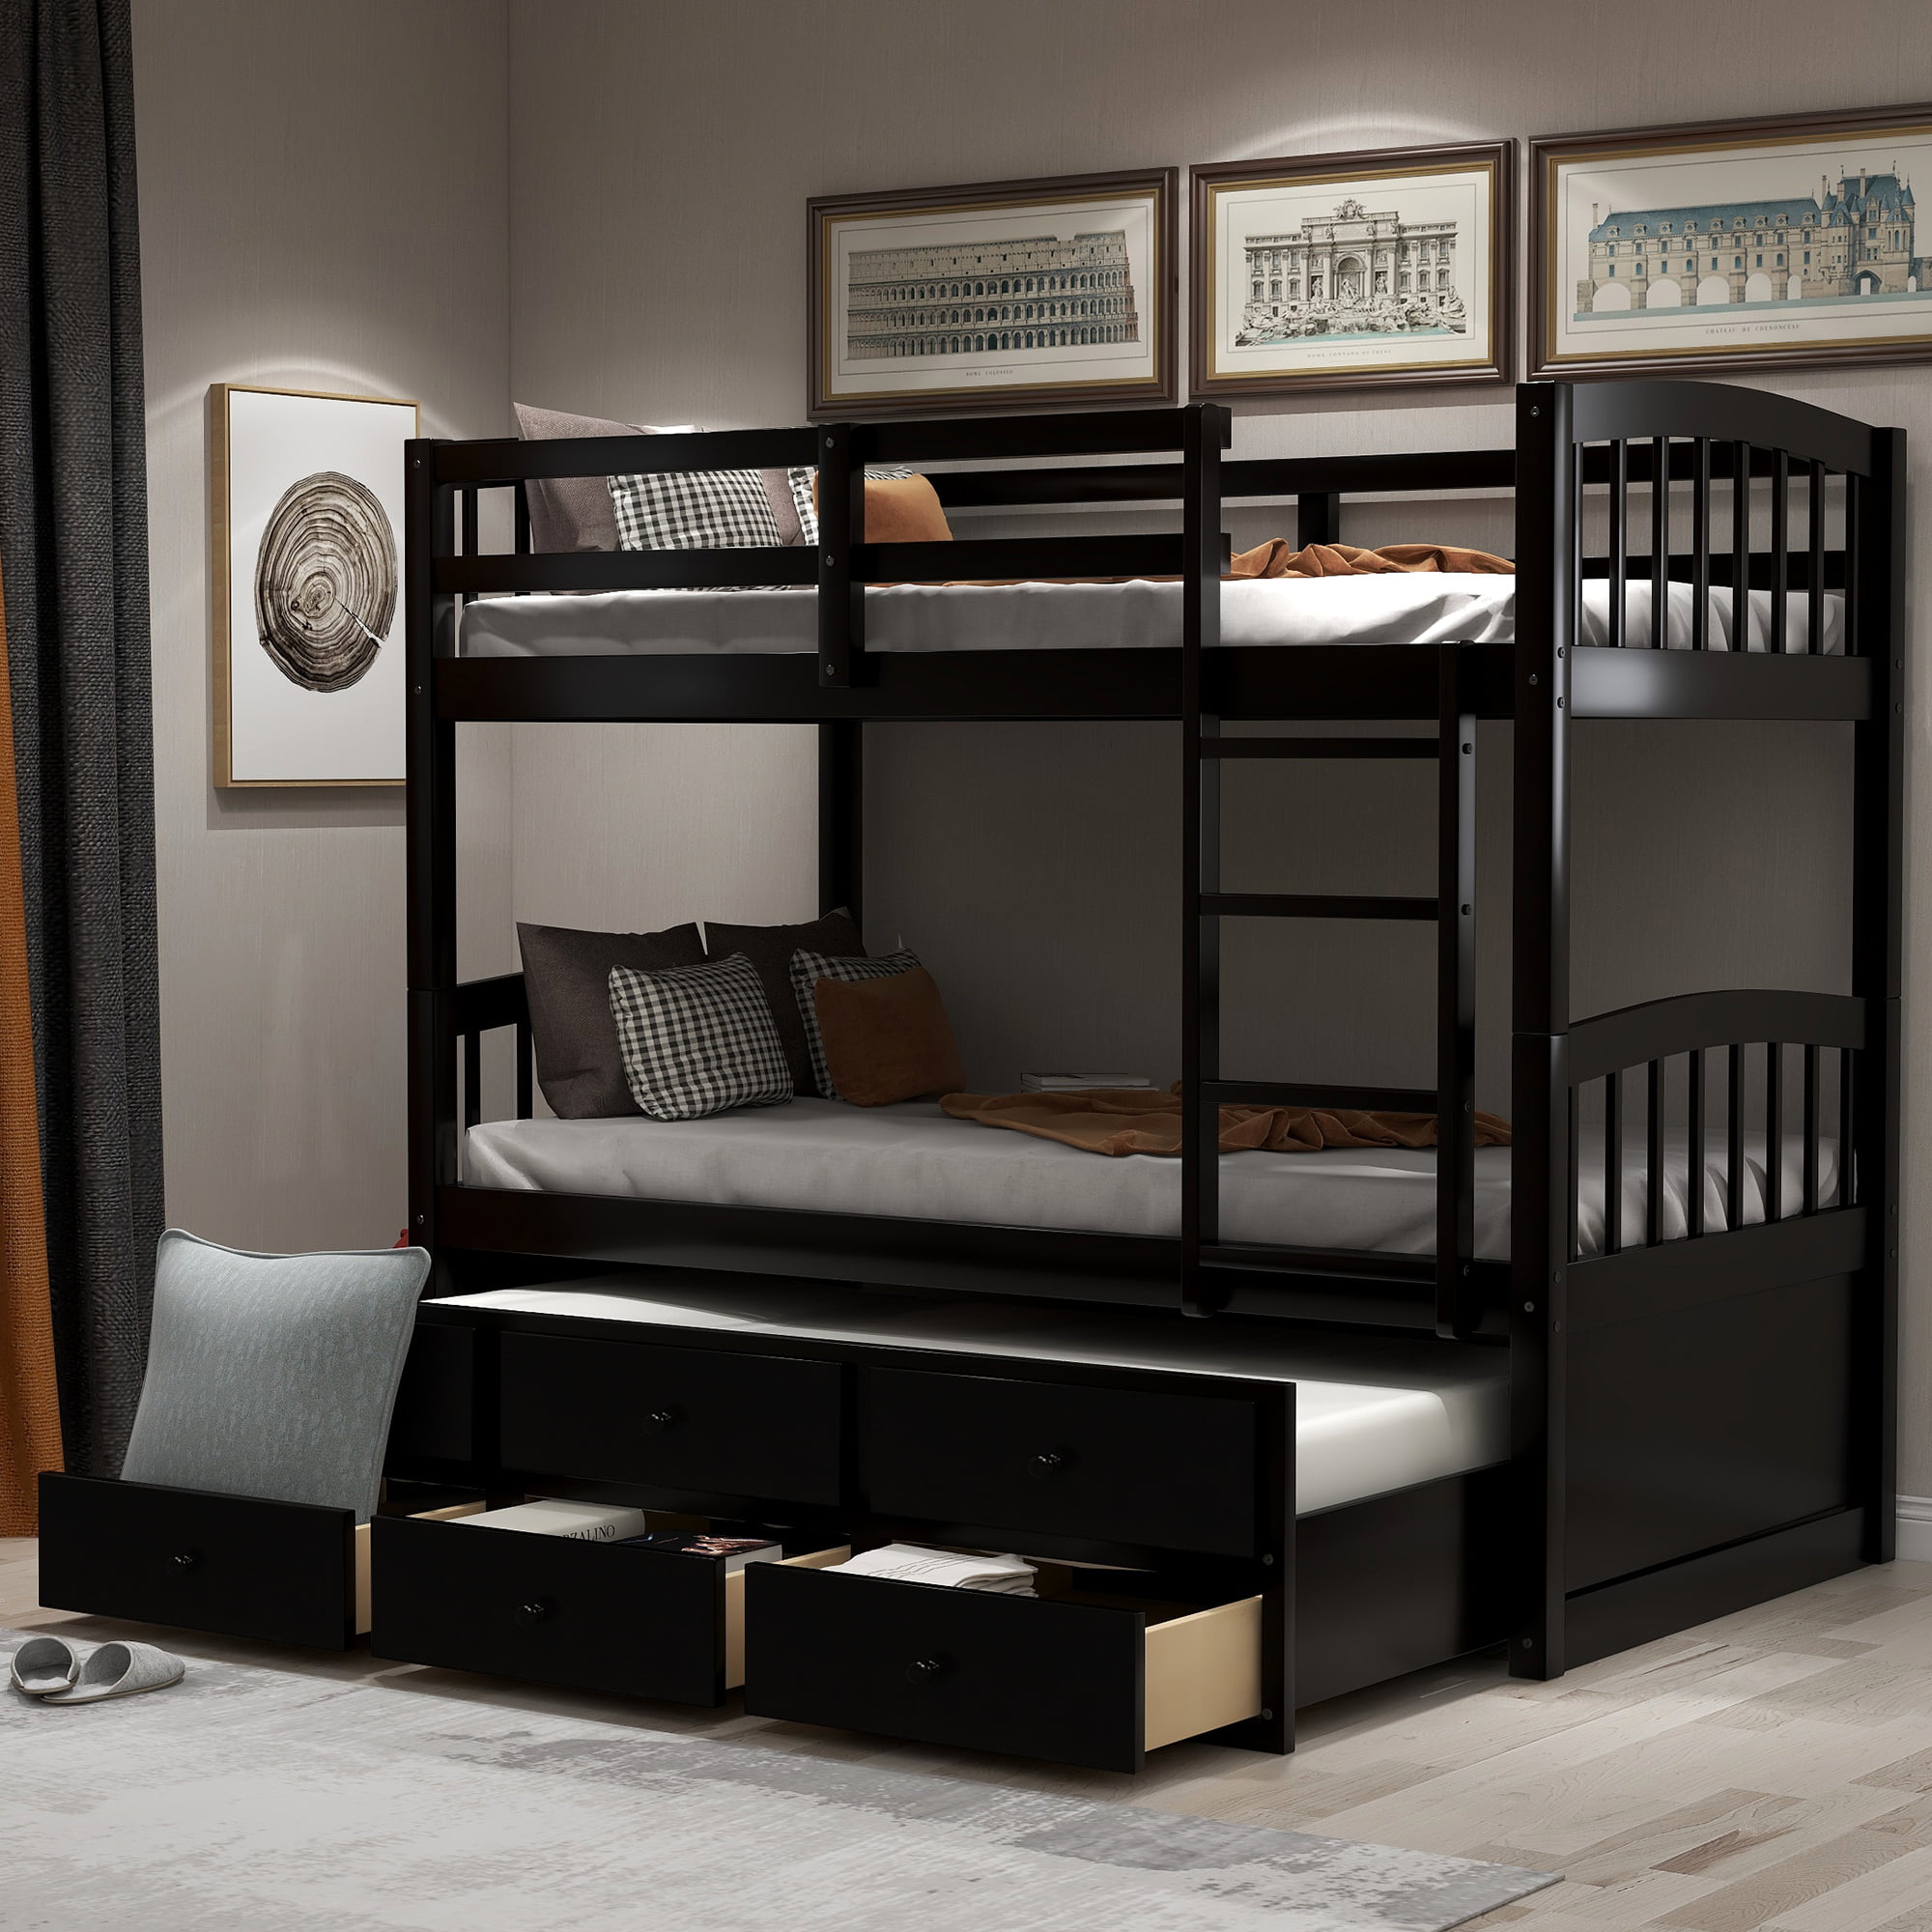 Twin Over Bunk Beds Solid Wood, Solid Wood Bunk Beds With Storage